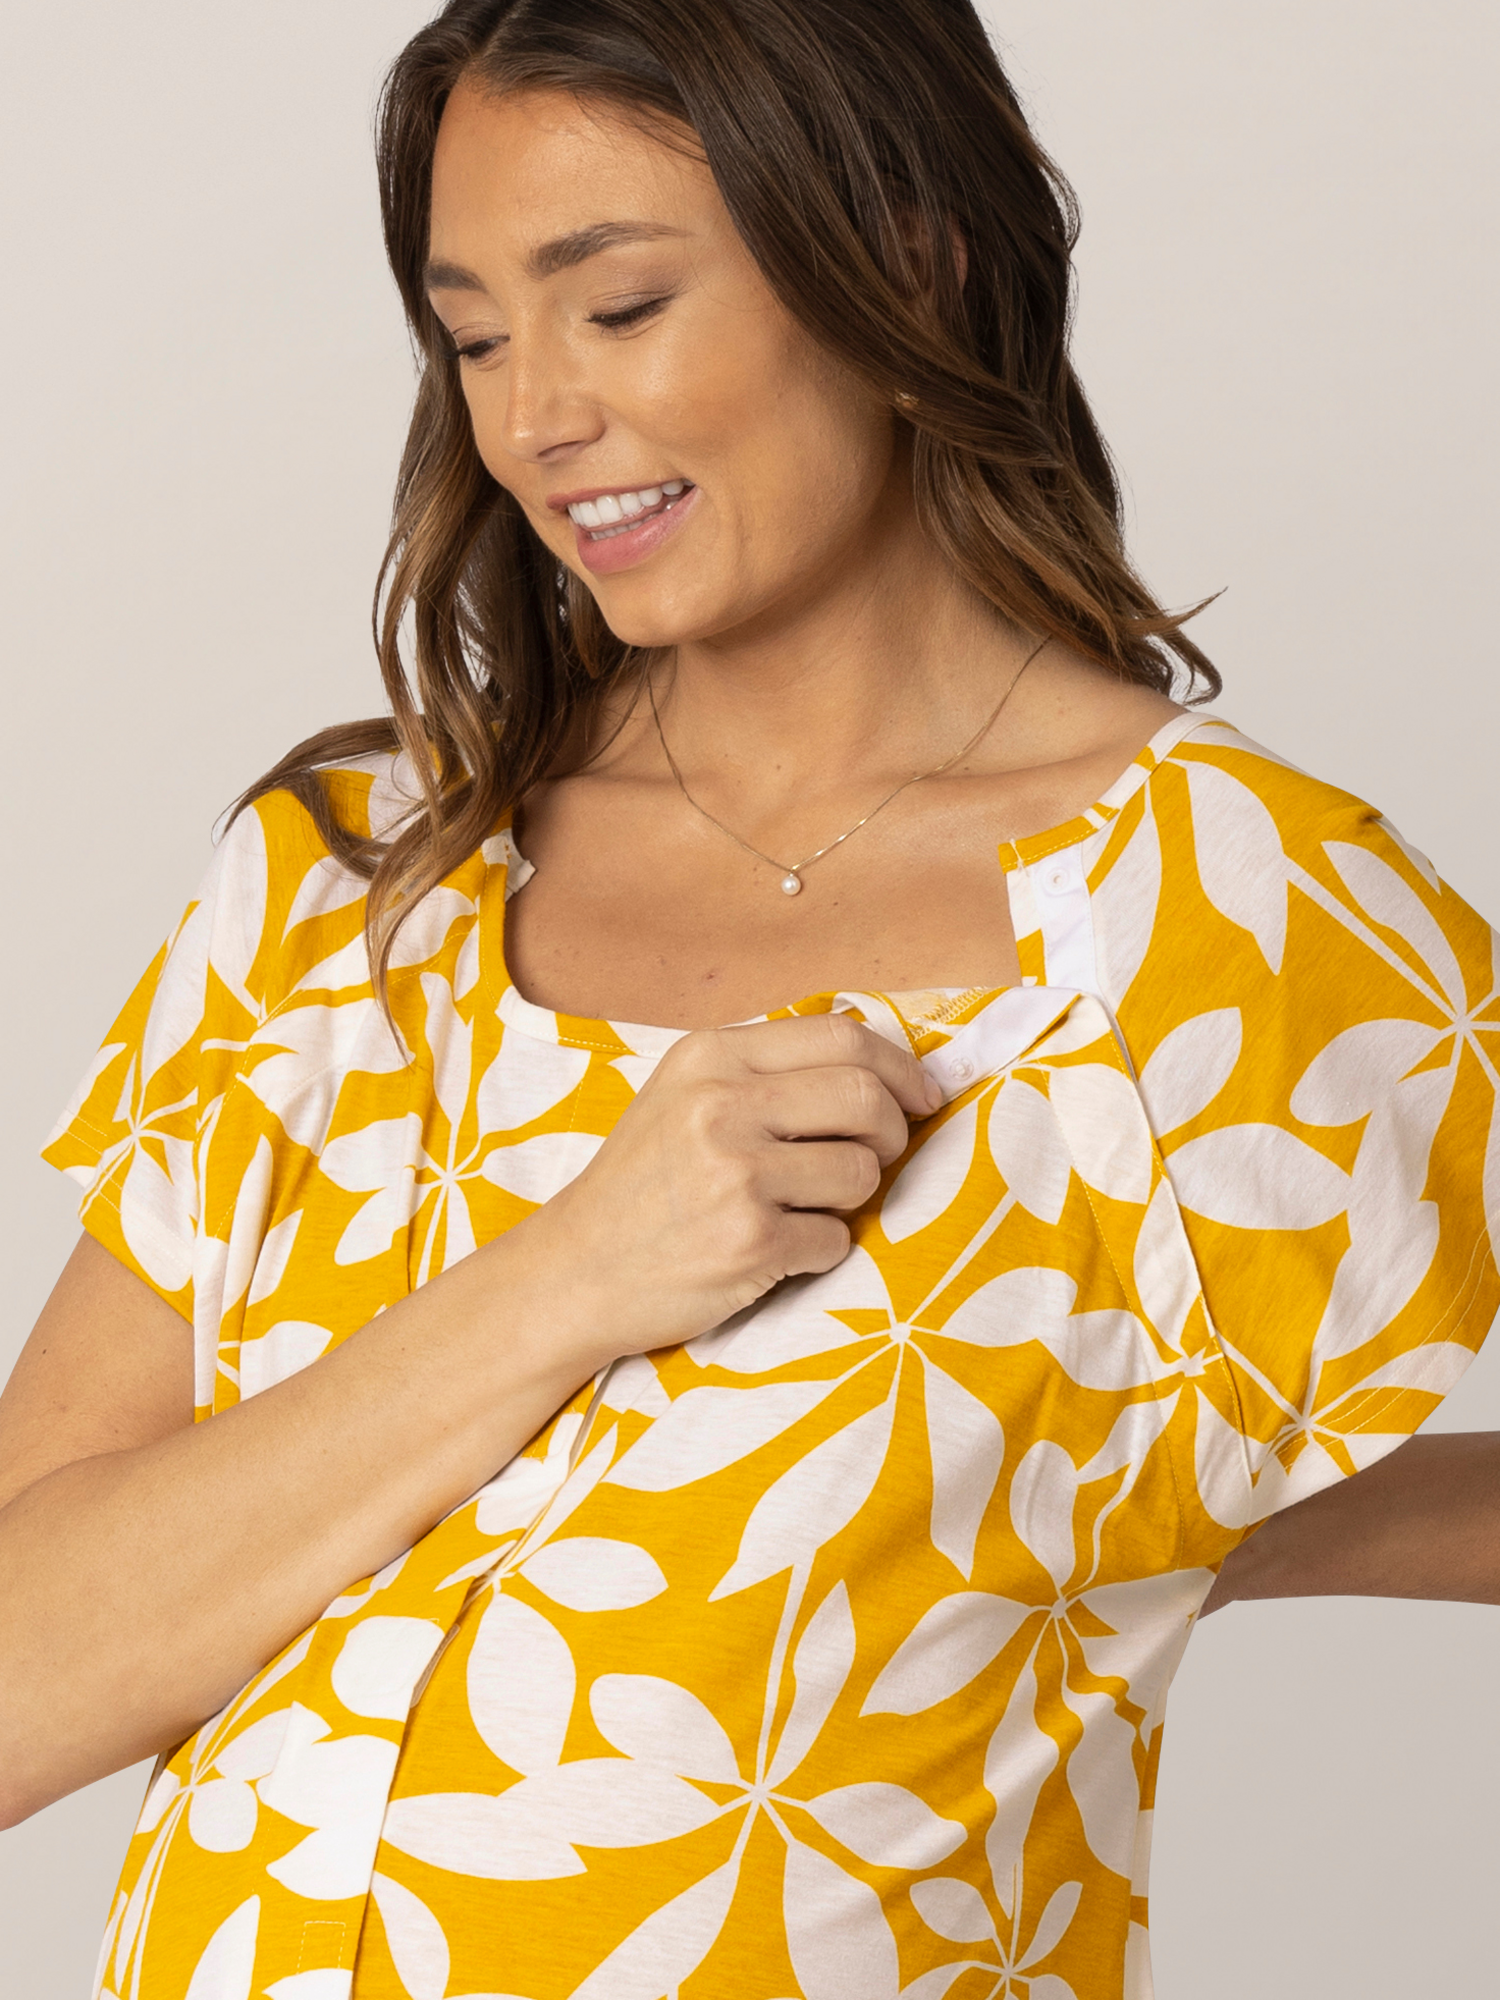 Detail view of front/side velcro opening on the Universal Labor & Delivery Gown in Honey Leaf, on model